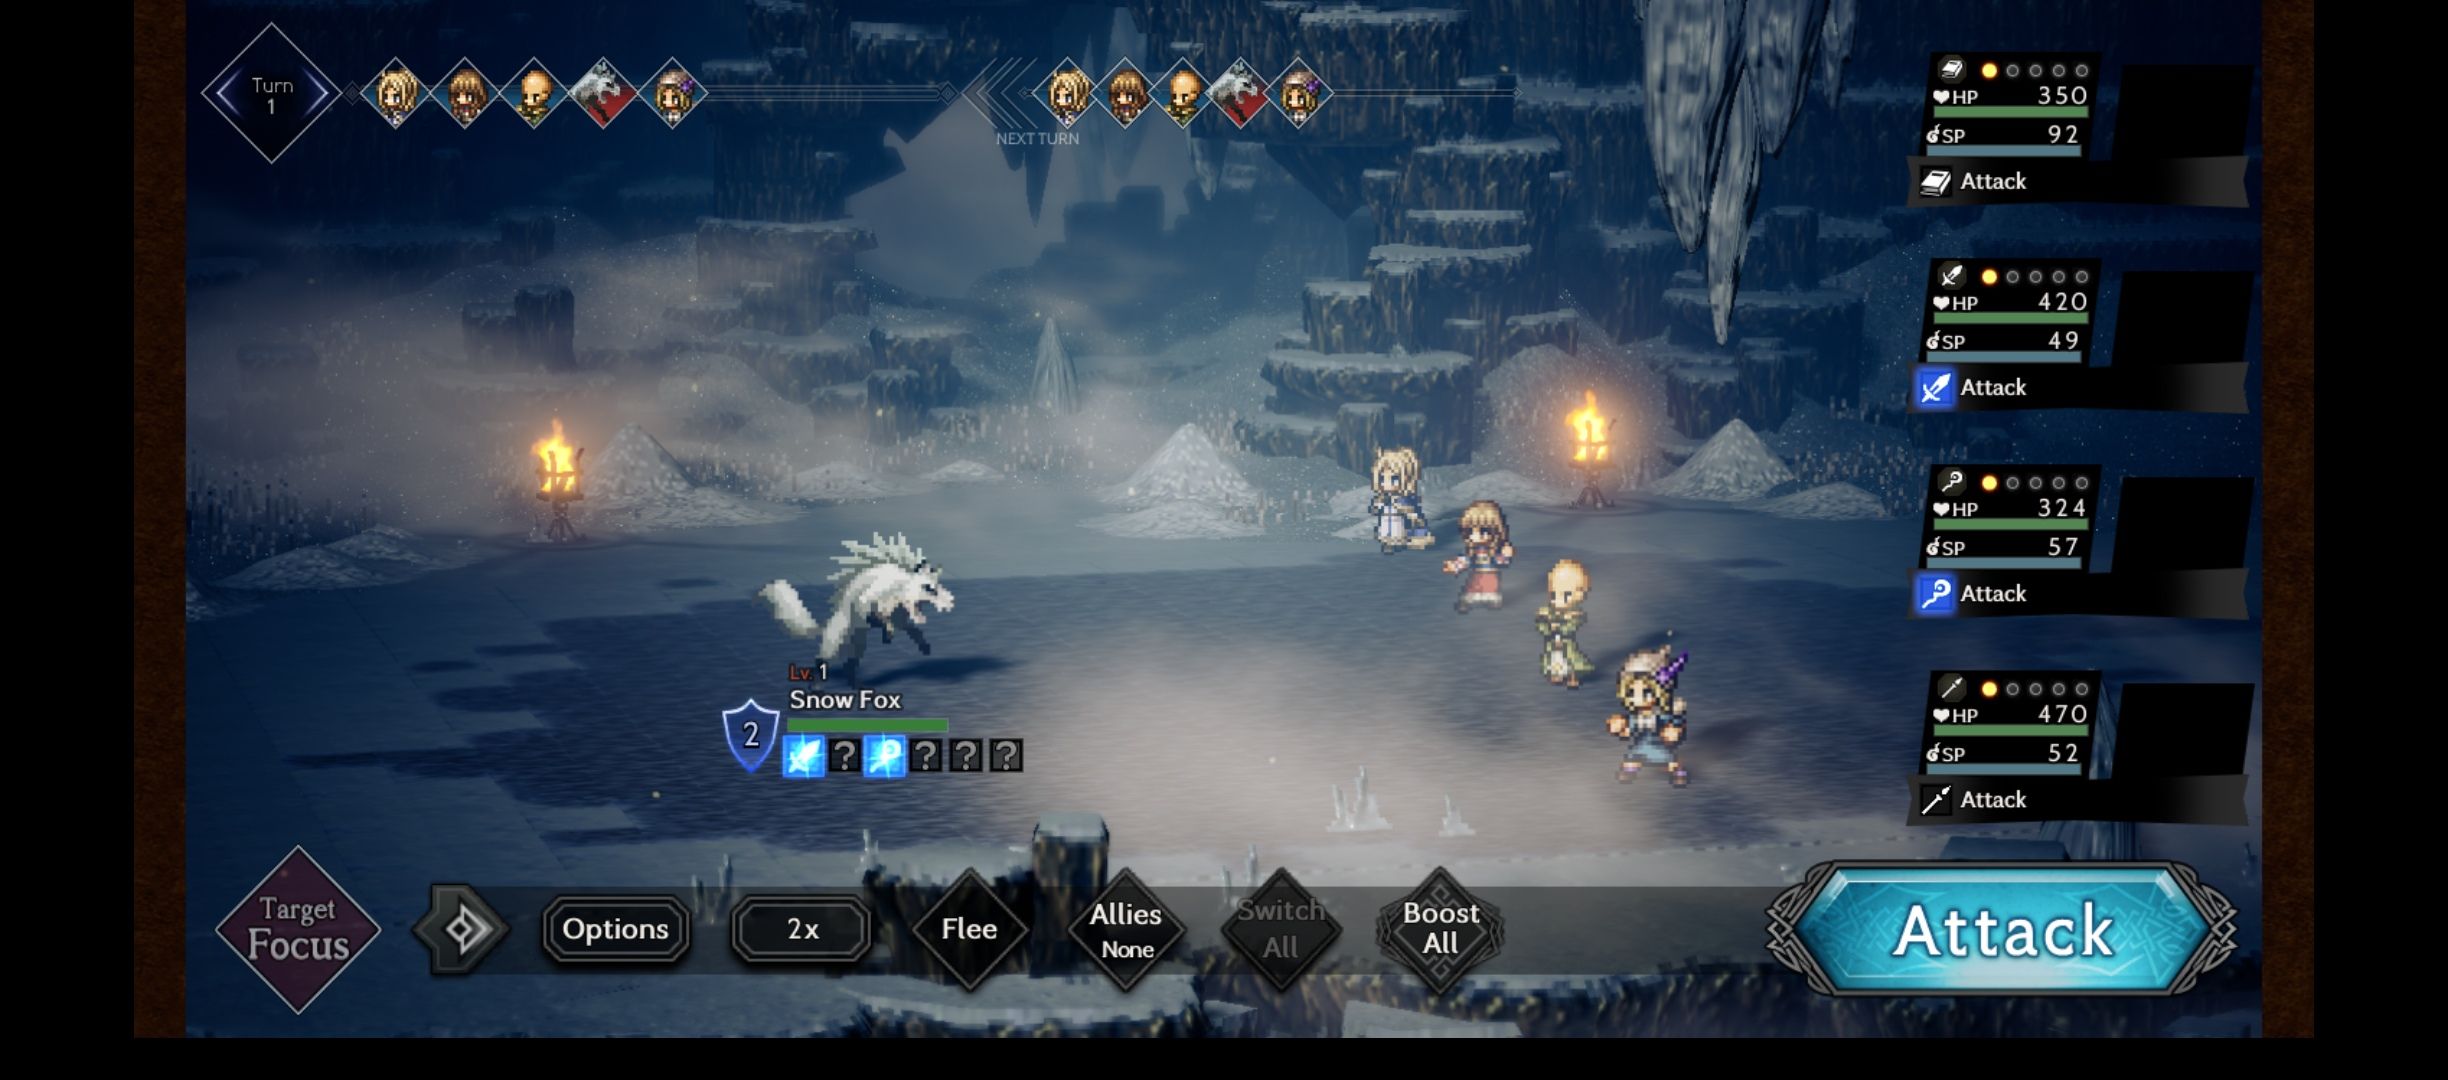 Octopath Traveler Champions of the Continent Closed Beta Hands-on Screen (10)